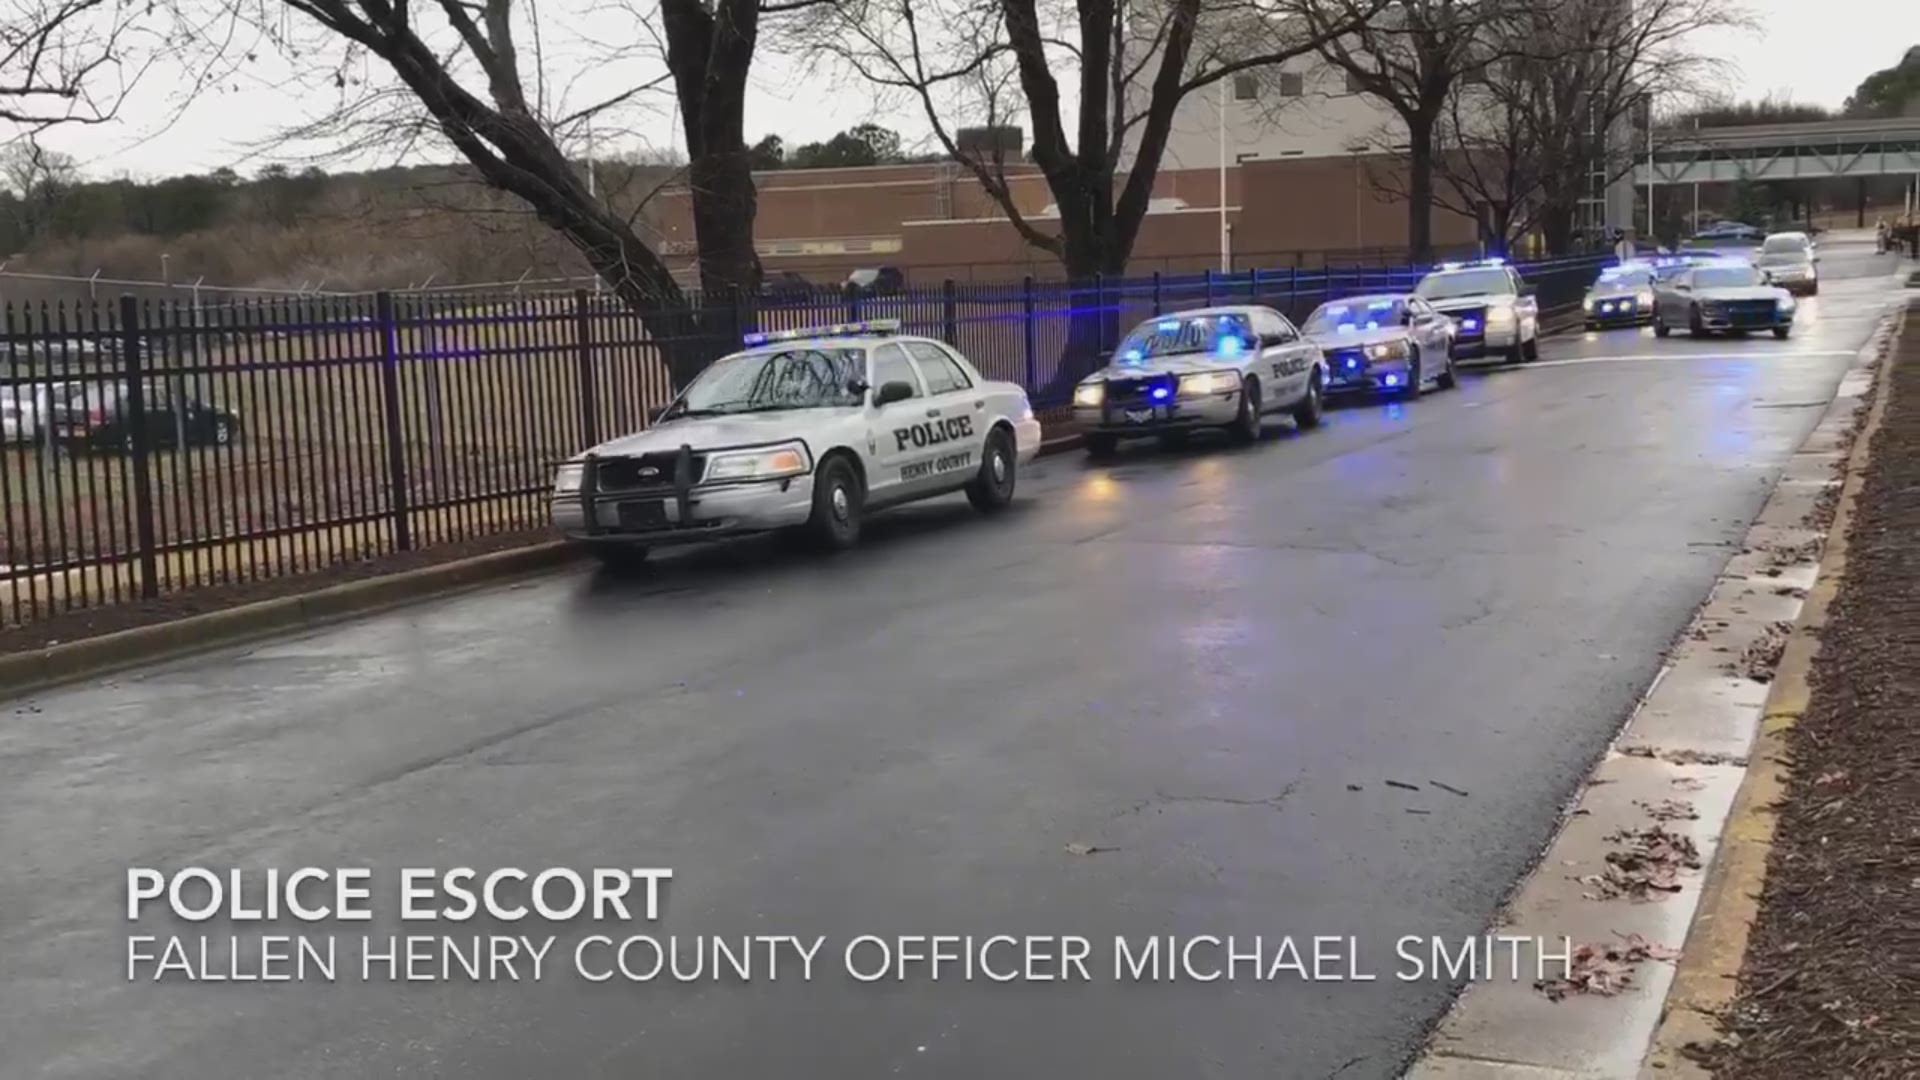 A procession of Henry County Police vehicles escorts the body of Officer Michael Smith to a funeral home on Fri., Dec. 29, 2018. Smith died after complications from a shooting on Dec. 8 in McDonough, Ga.